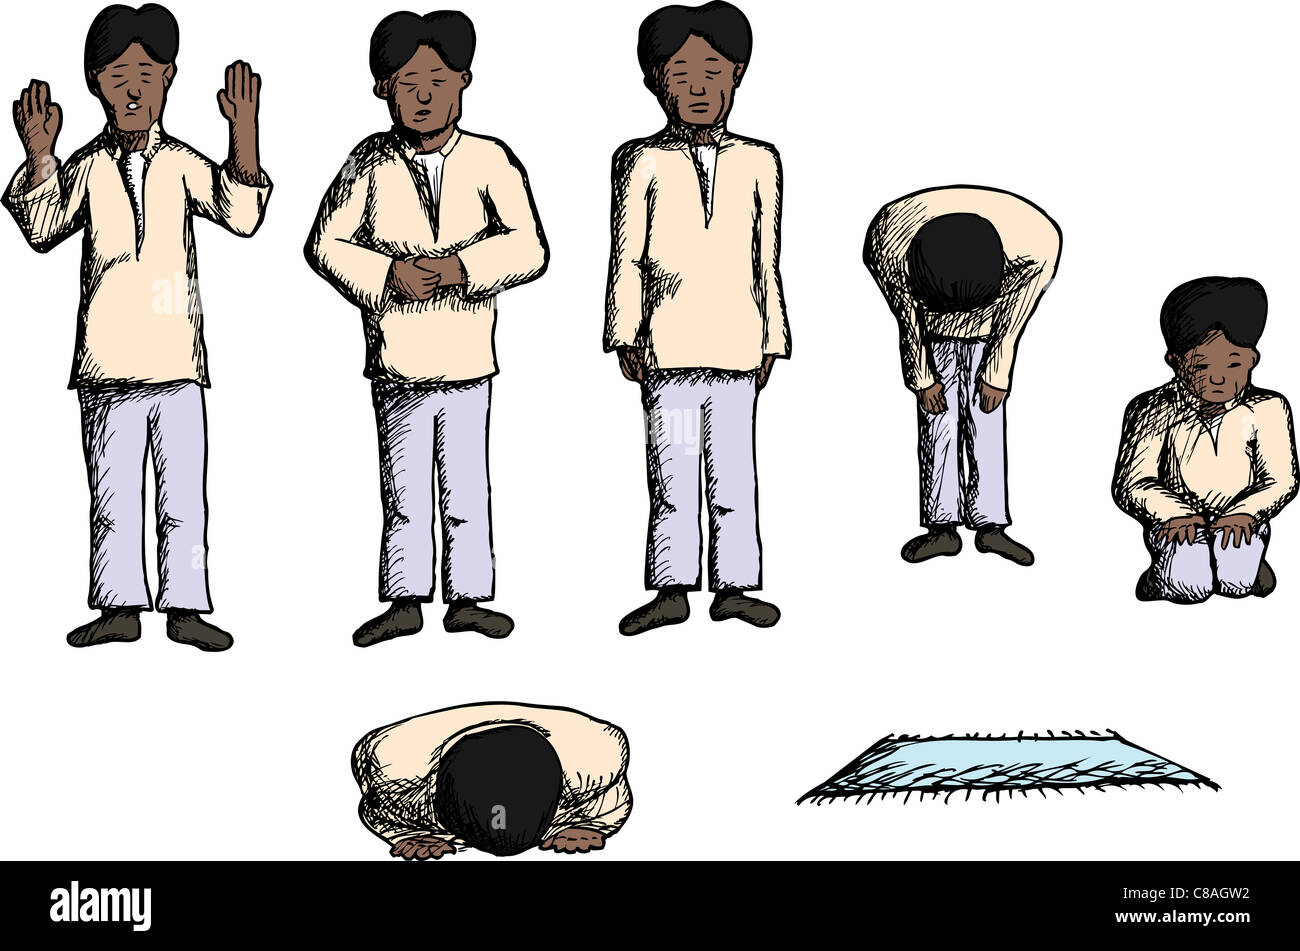 Man in different prayer positions with prayer mat Stock Photo